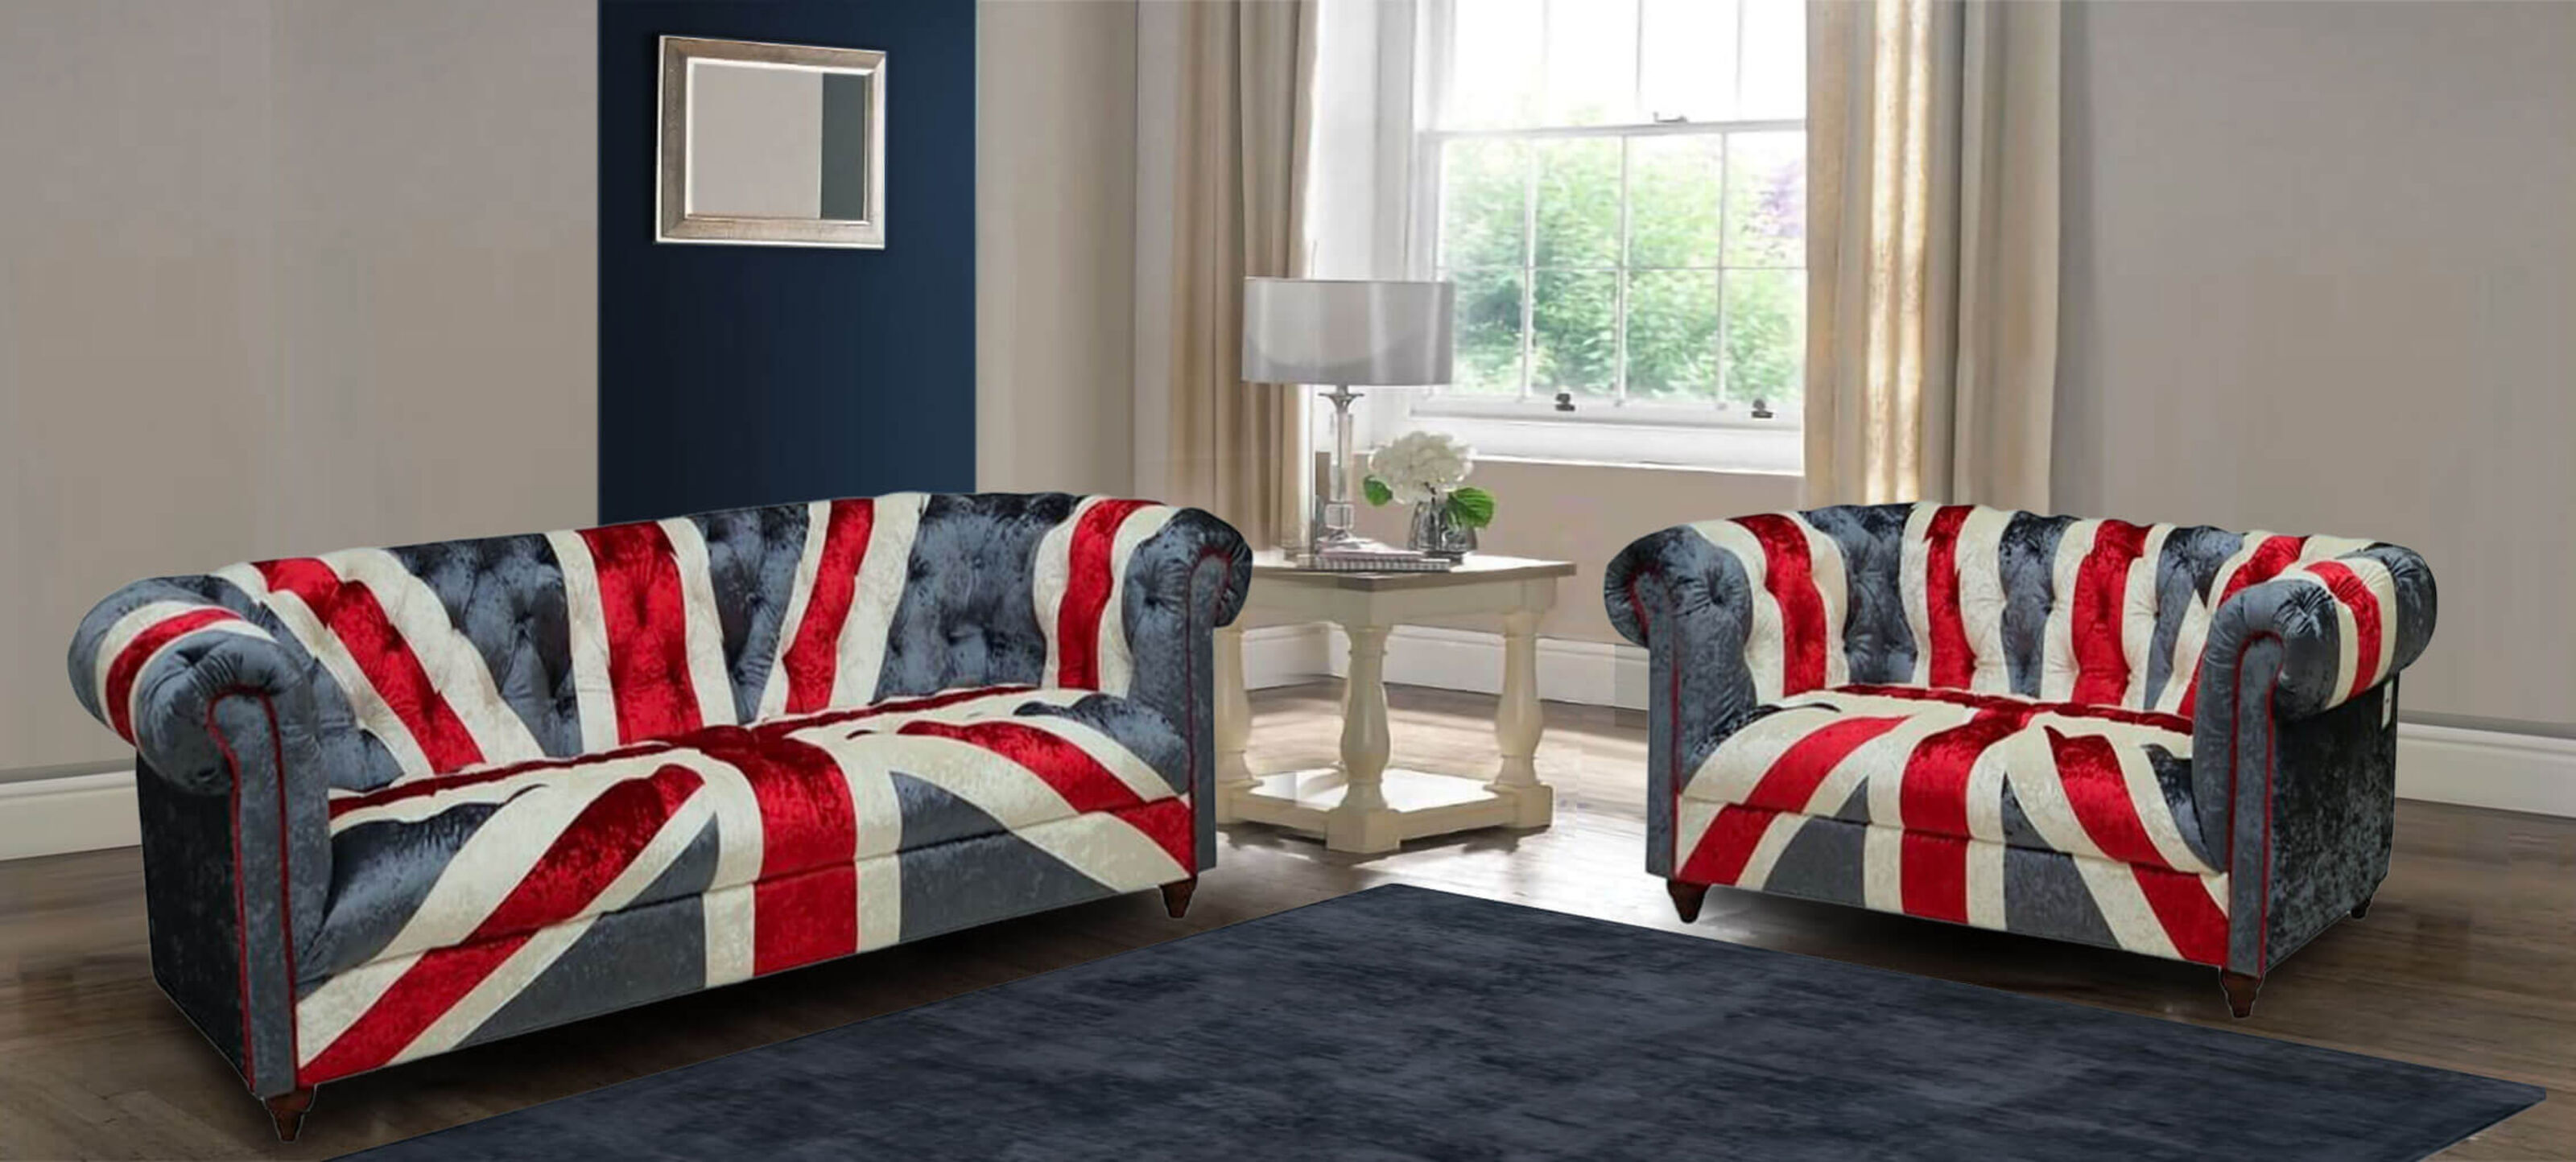 Patriotic Elegance Chesterfield Sofas Featuring the Union Jack Design  %Post Title